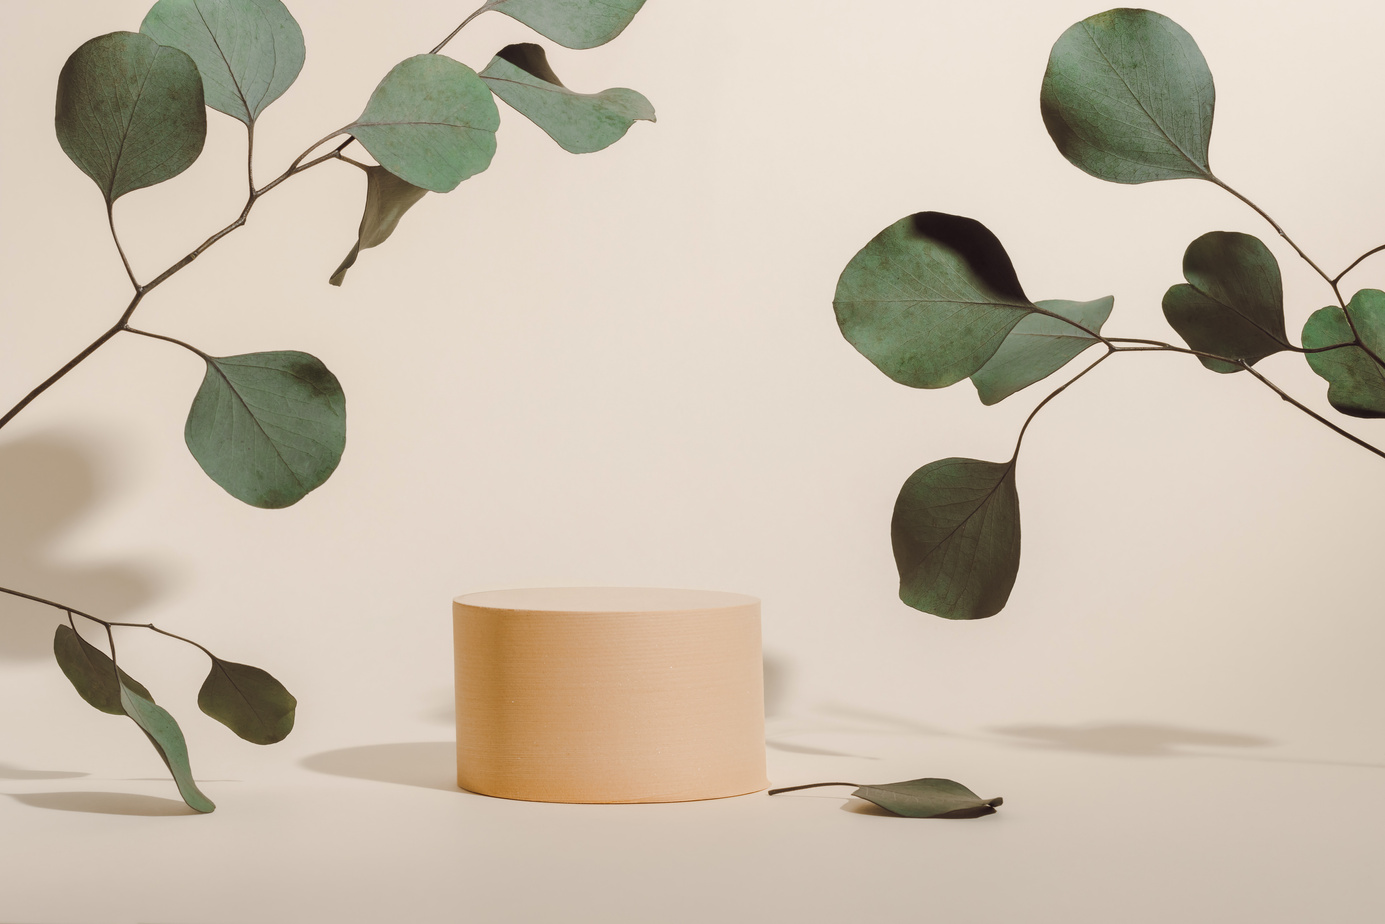 Aesthetic showcase with eucalyptus leaves and shadows